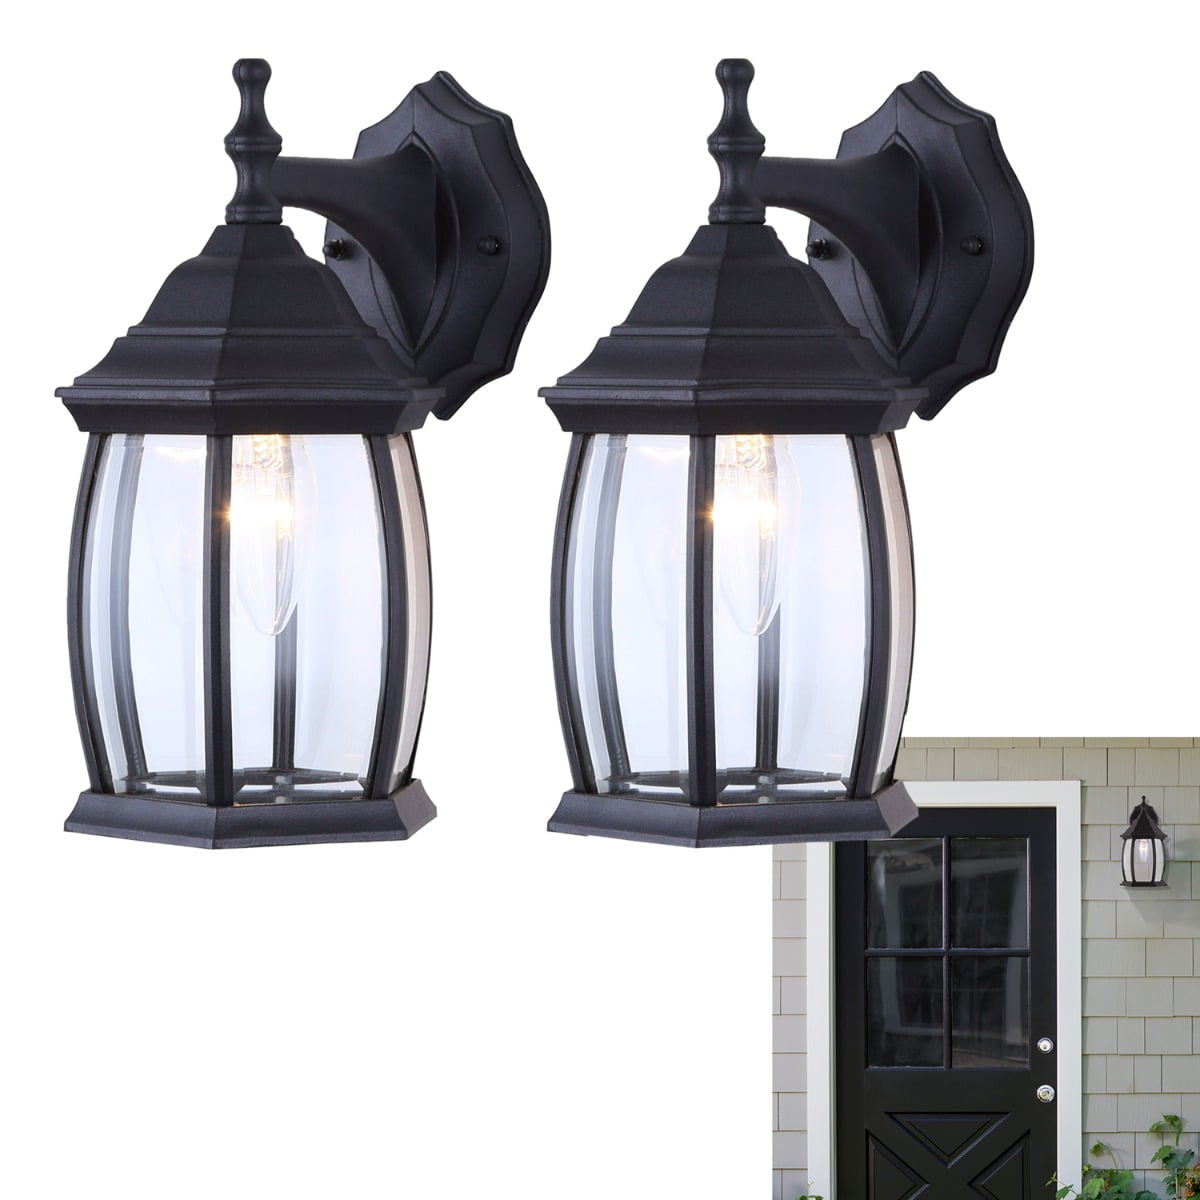 Outdoor Lantern Wall Light Sconce Porch Lighting Fixture Steel Cage Black 2 Pack 